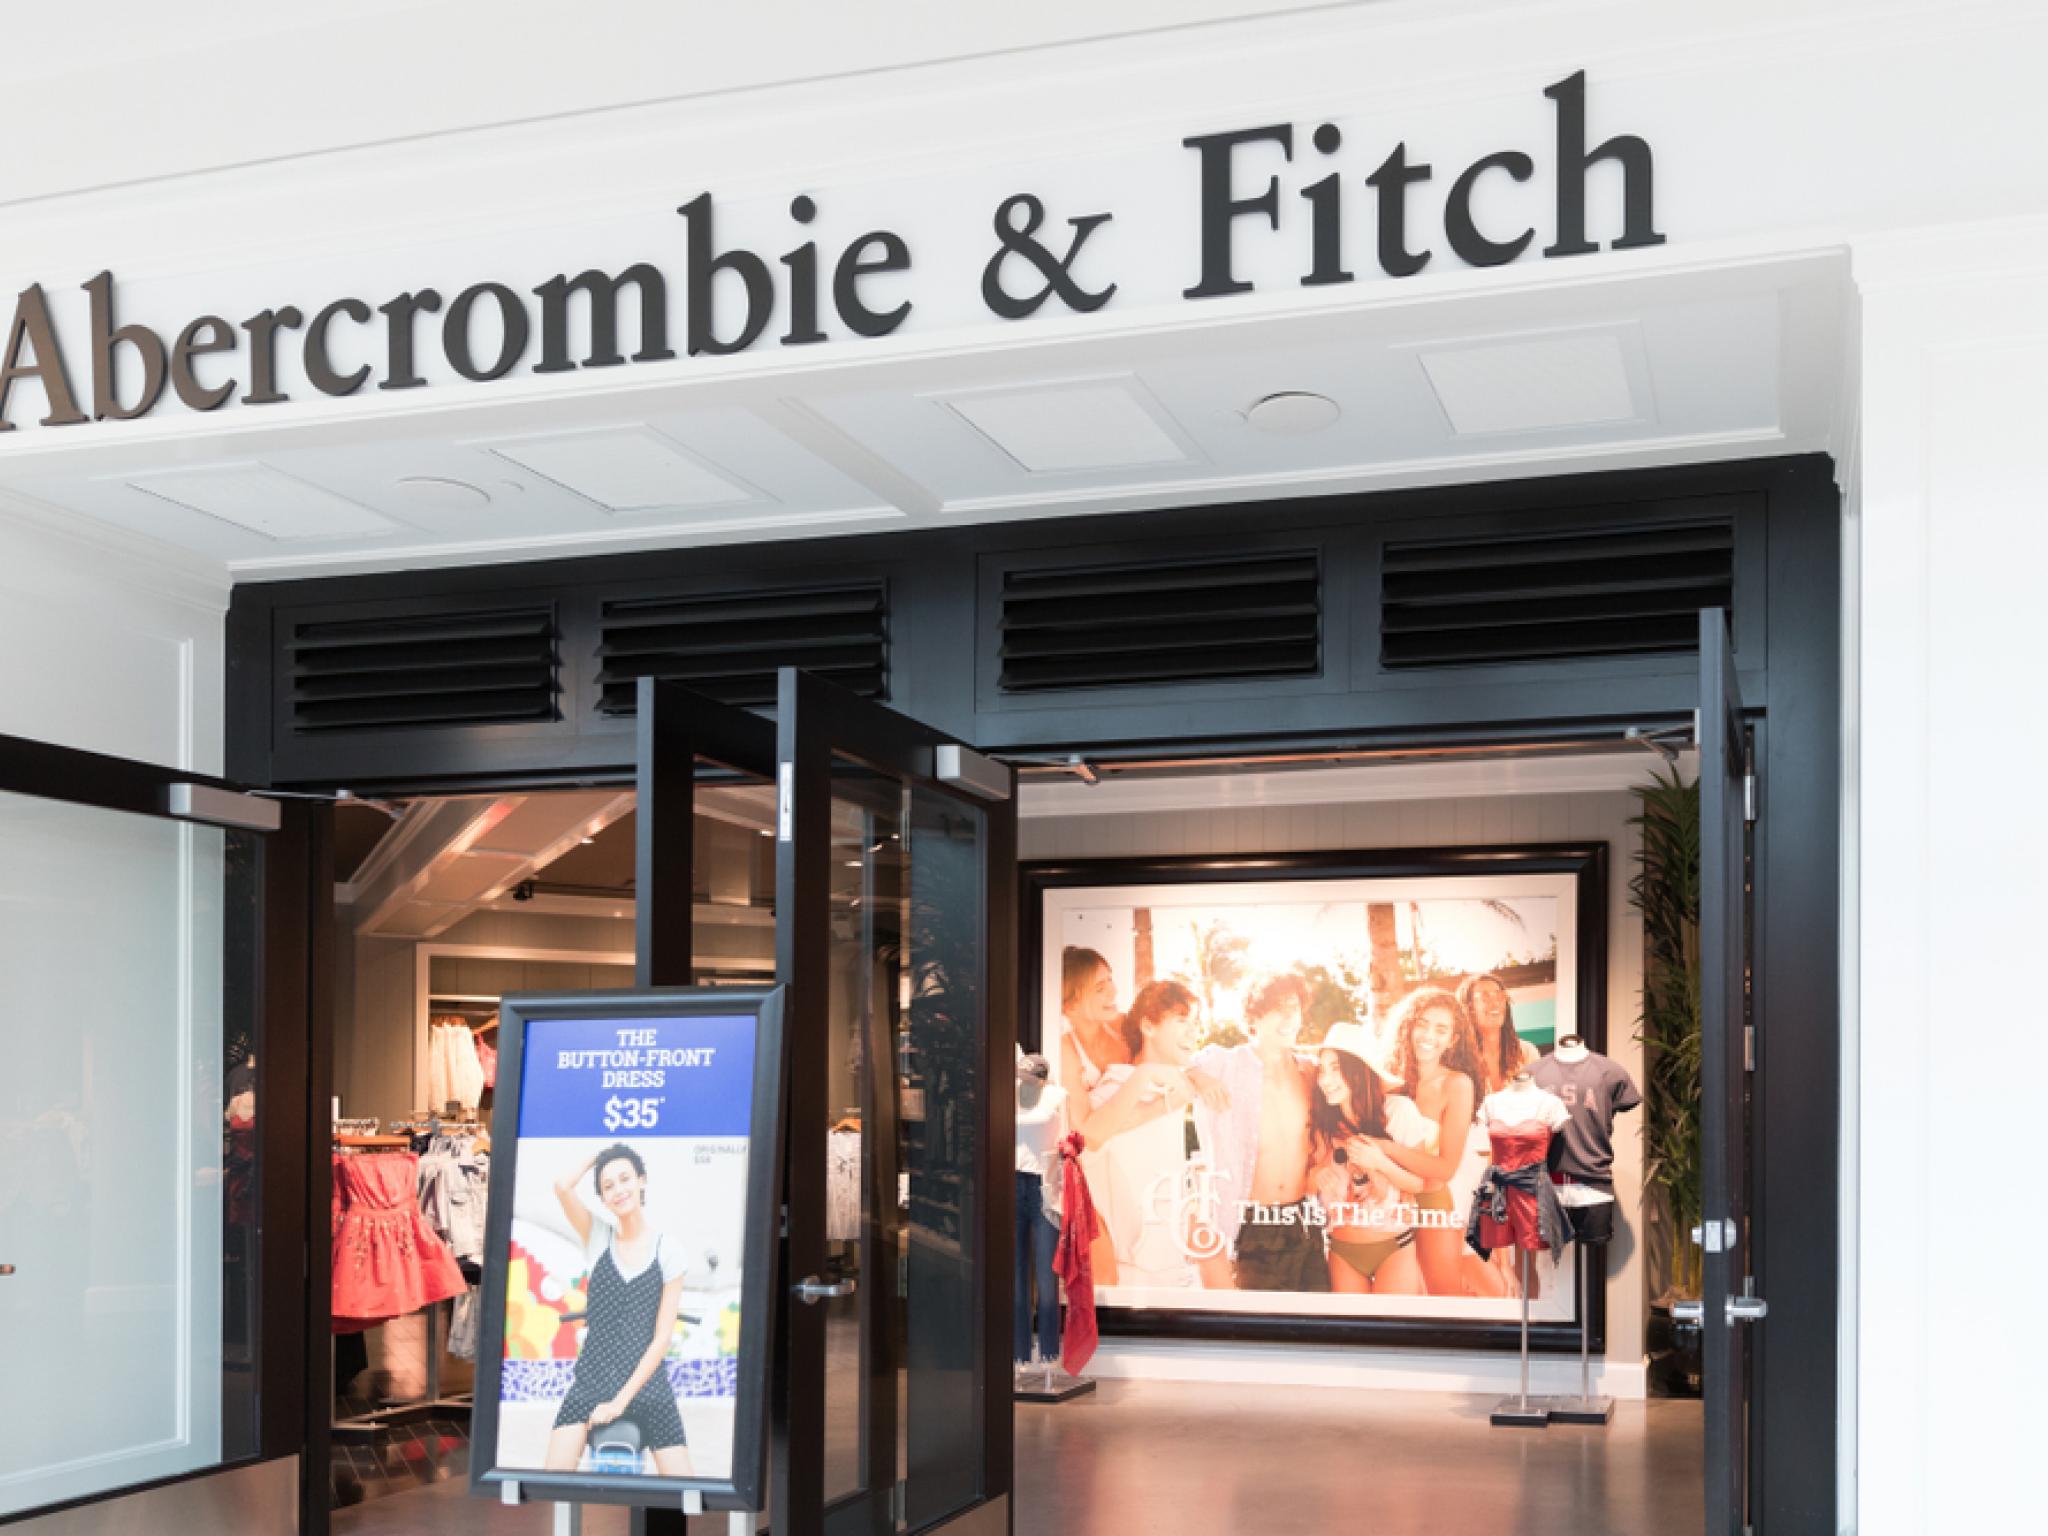  abercrombie--fitch-analysts-boost-their-forecasts-after-upbeat-earnings 